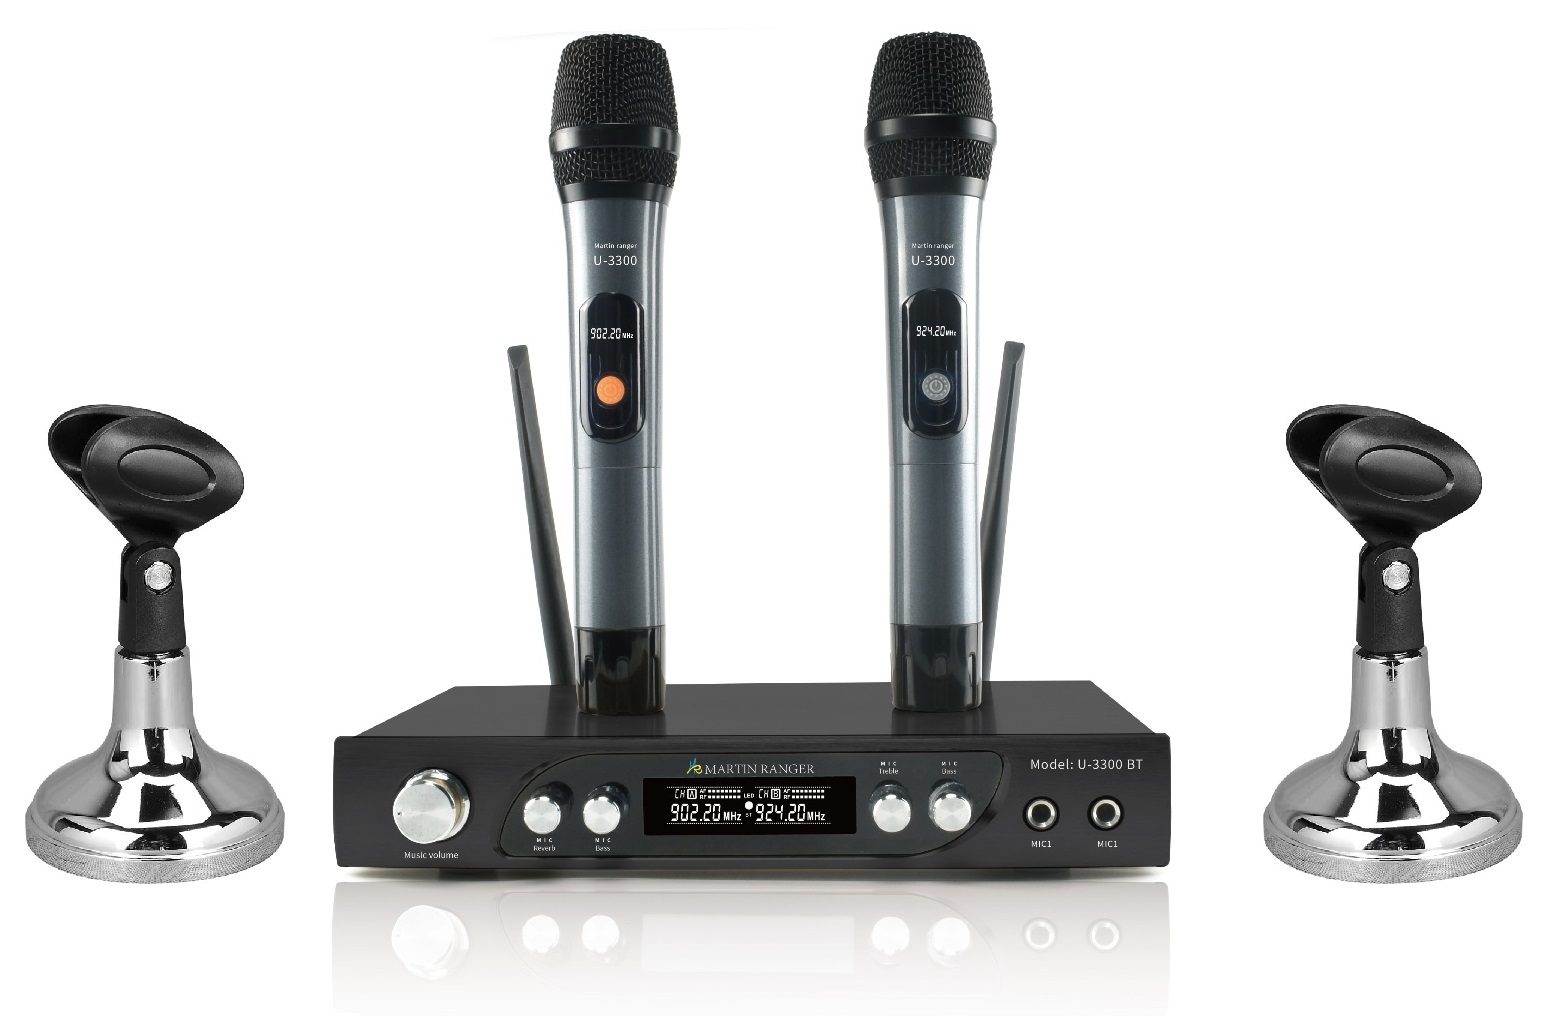 U3300BT UHF Wireless Microphone System with built-in Digital Mixer - image 1 of 6